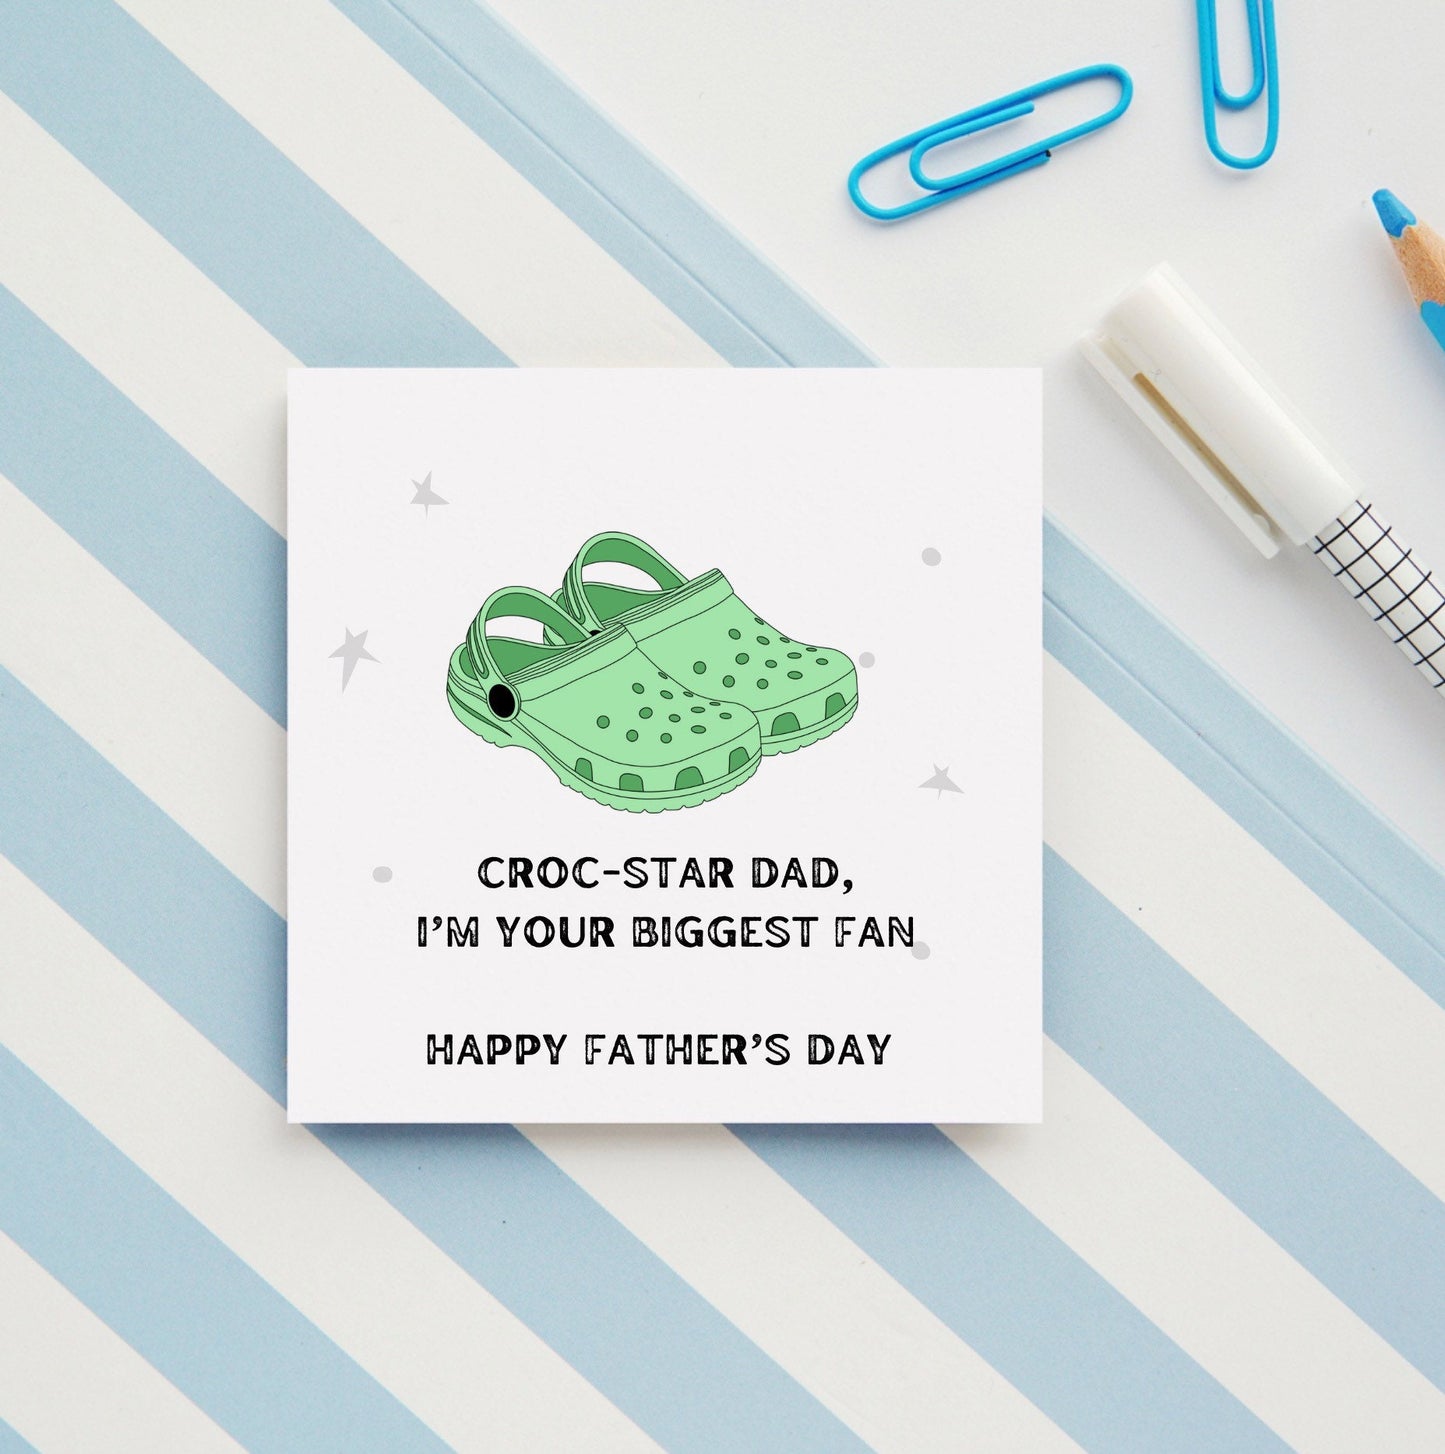 Croc-star card, Father’s Day card for dad, greeting card for dads who live in crocs, funny, novelty Father’s Day cards